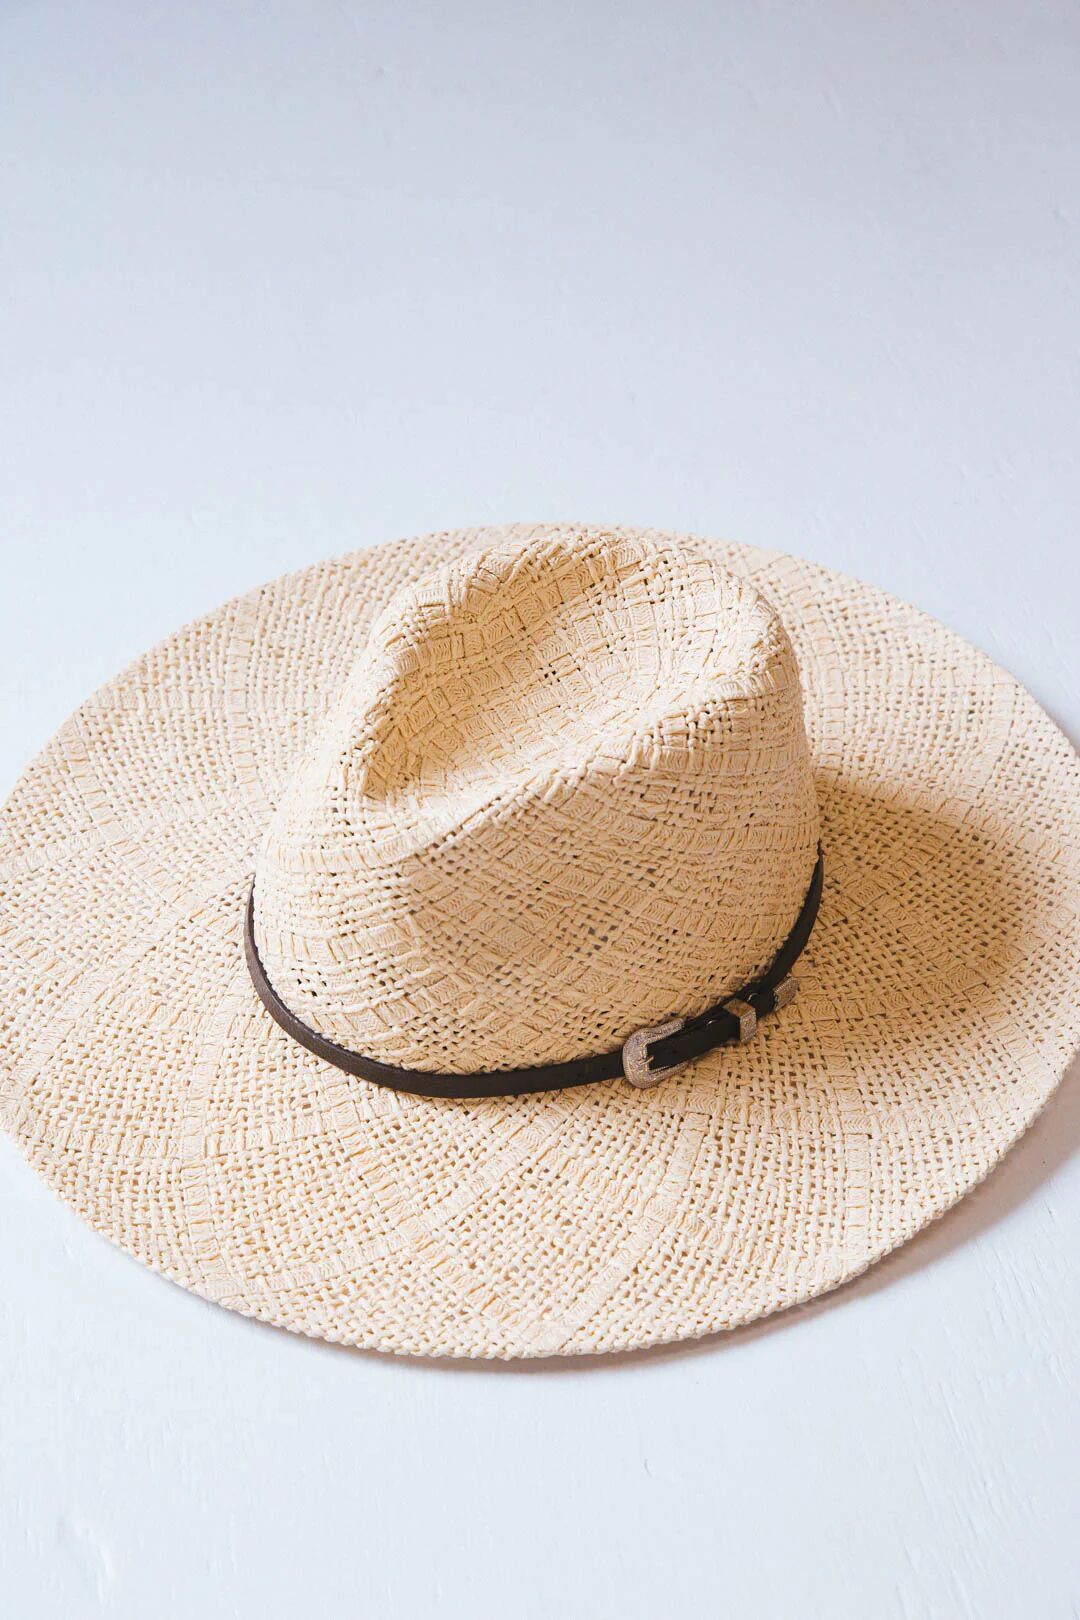 Fame Accessories Sunset Love Straw Hat Natural - One Size